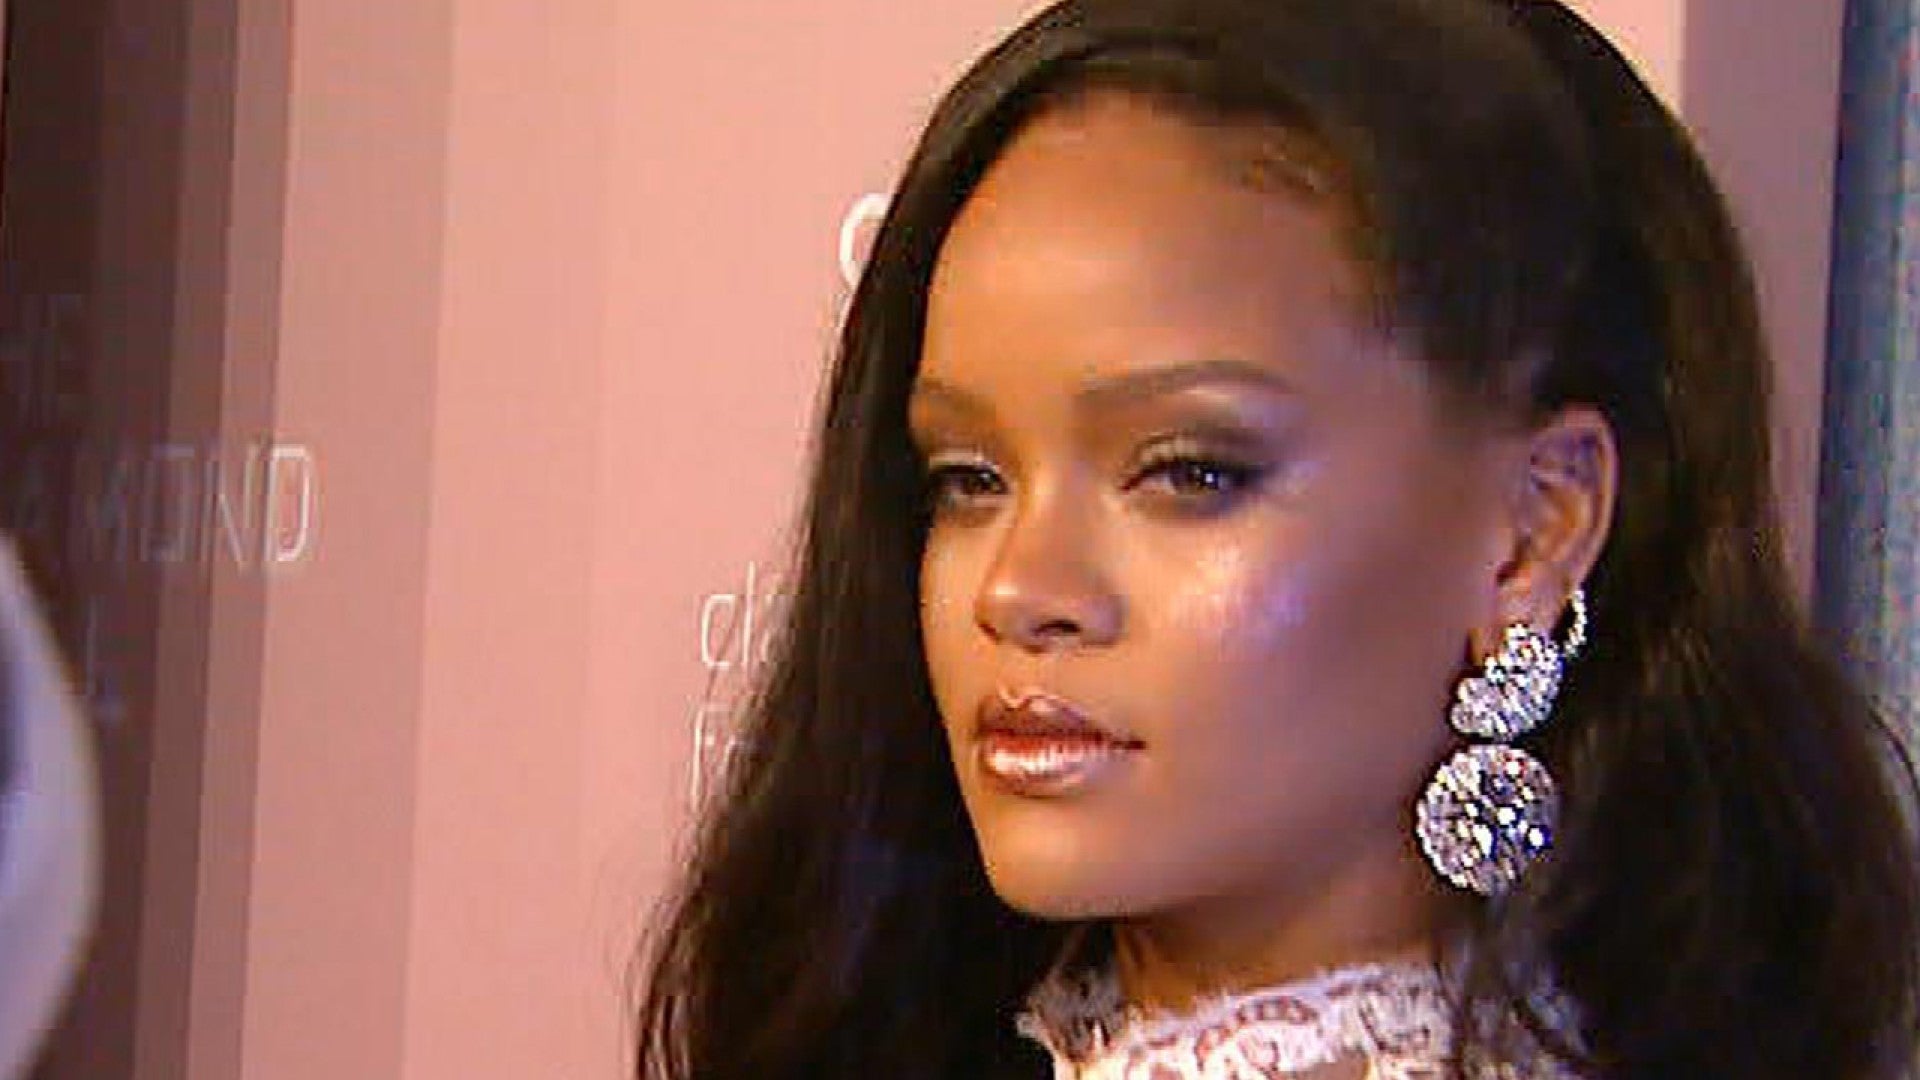 Super Bowl 2023 comes to dramatic end after Rihanna, celeb appearances